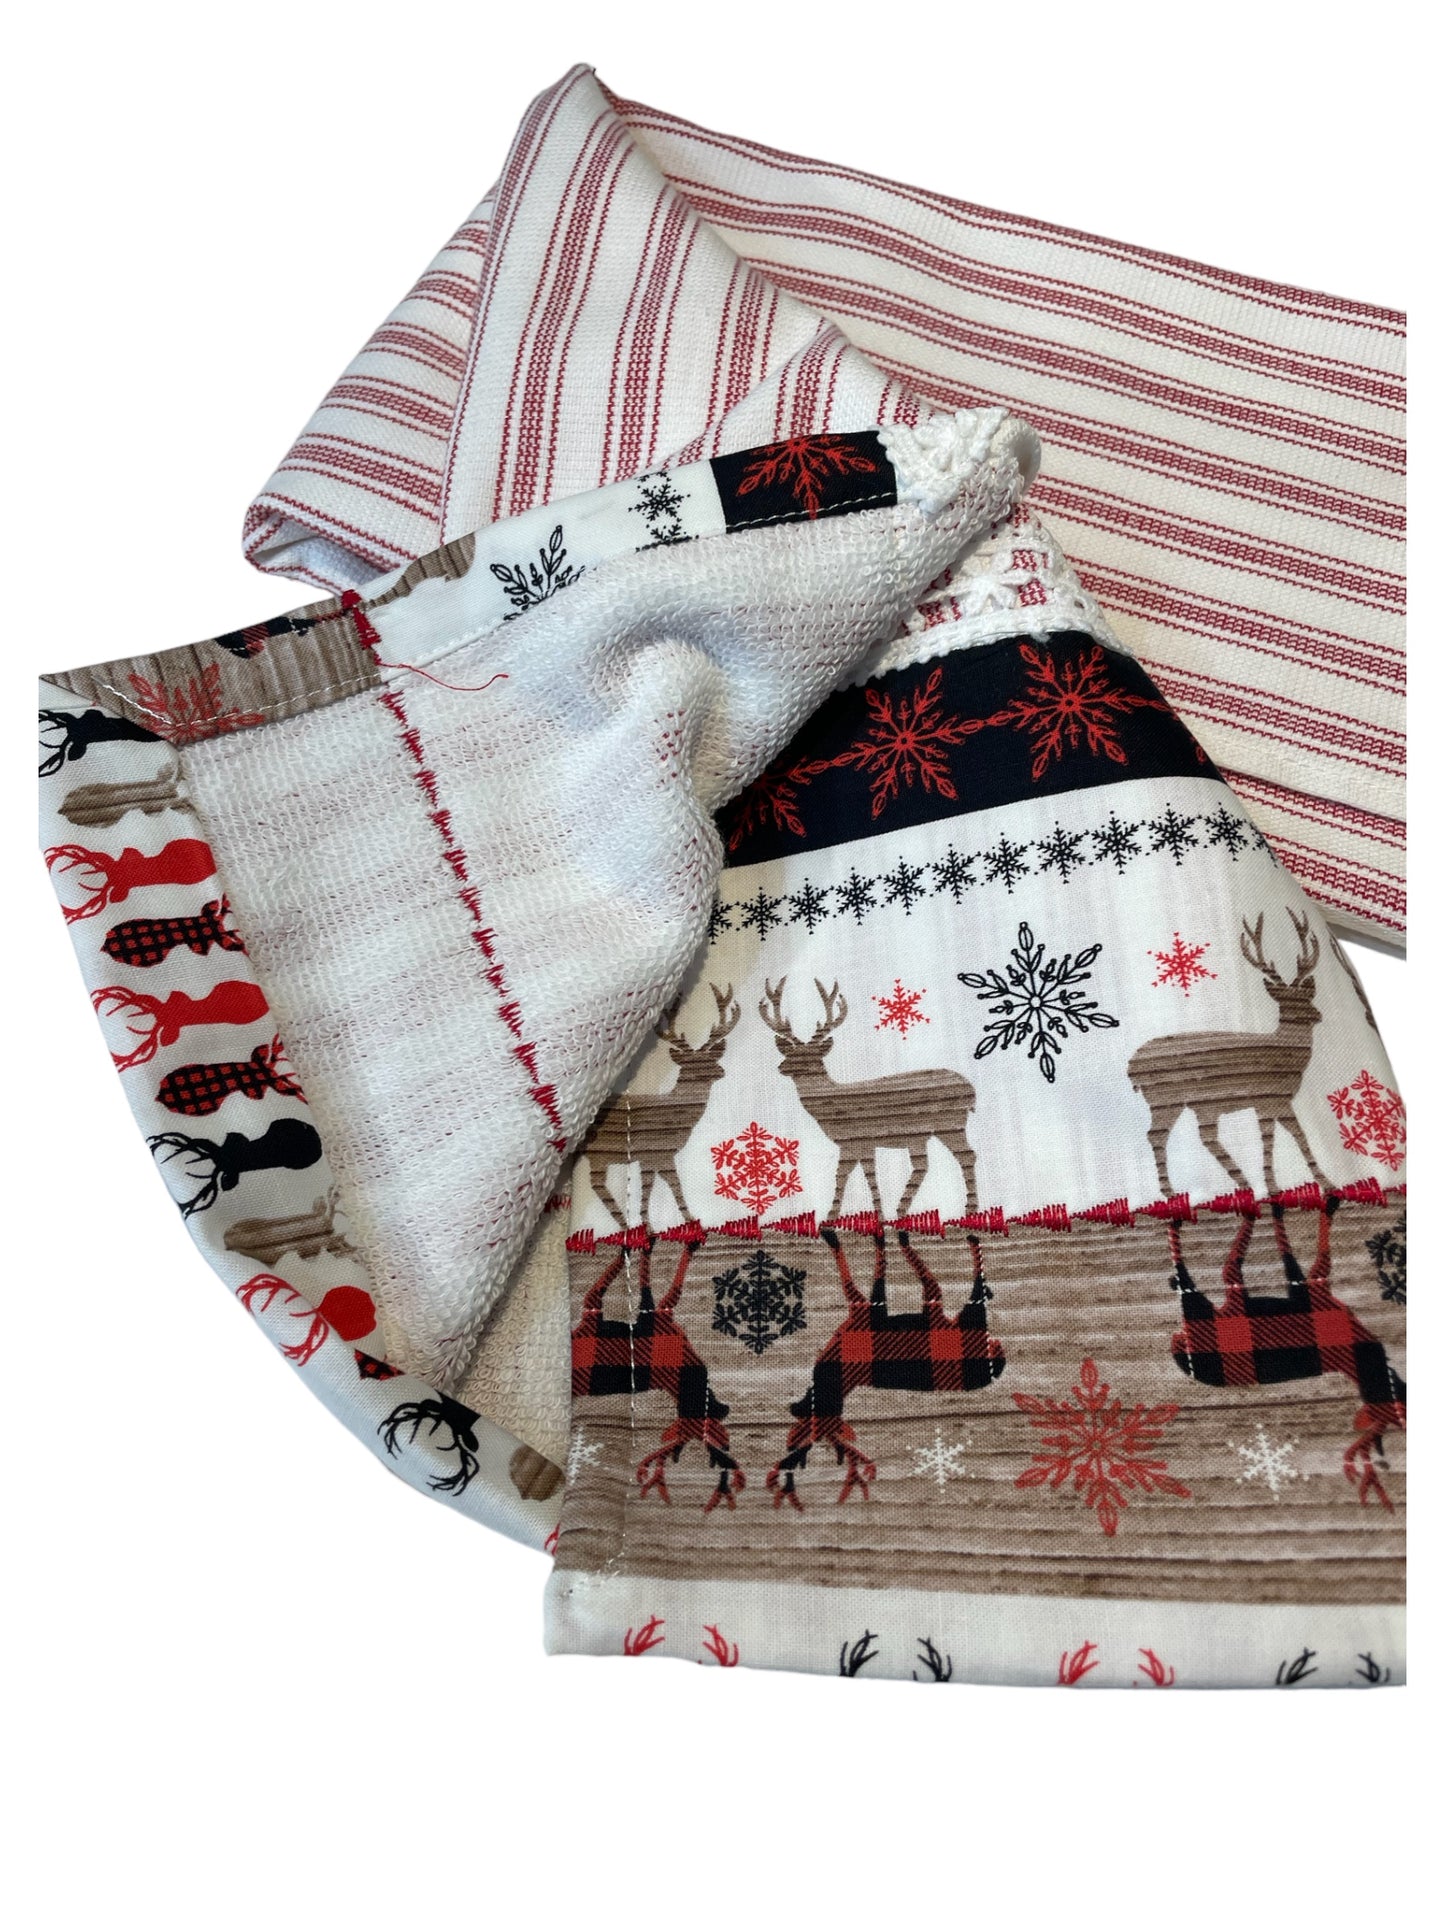 Festive Christmas Dish Towel - Handcrafted Reindeer & Snowflake Design with White Cotton Lace Trim